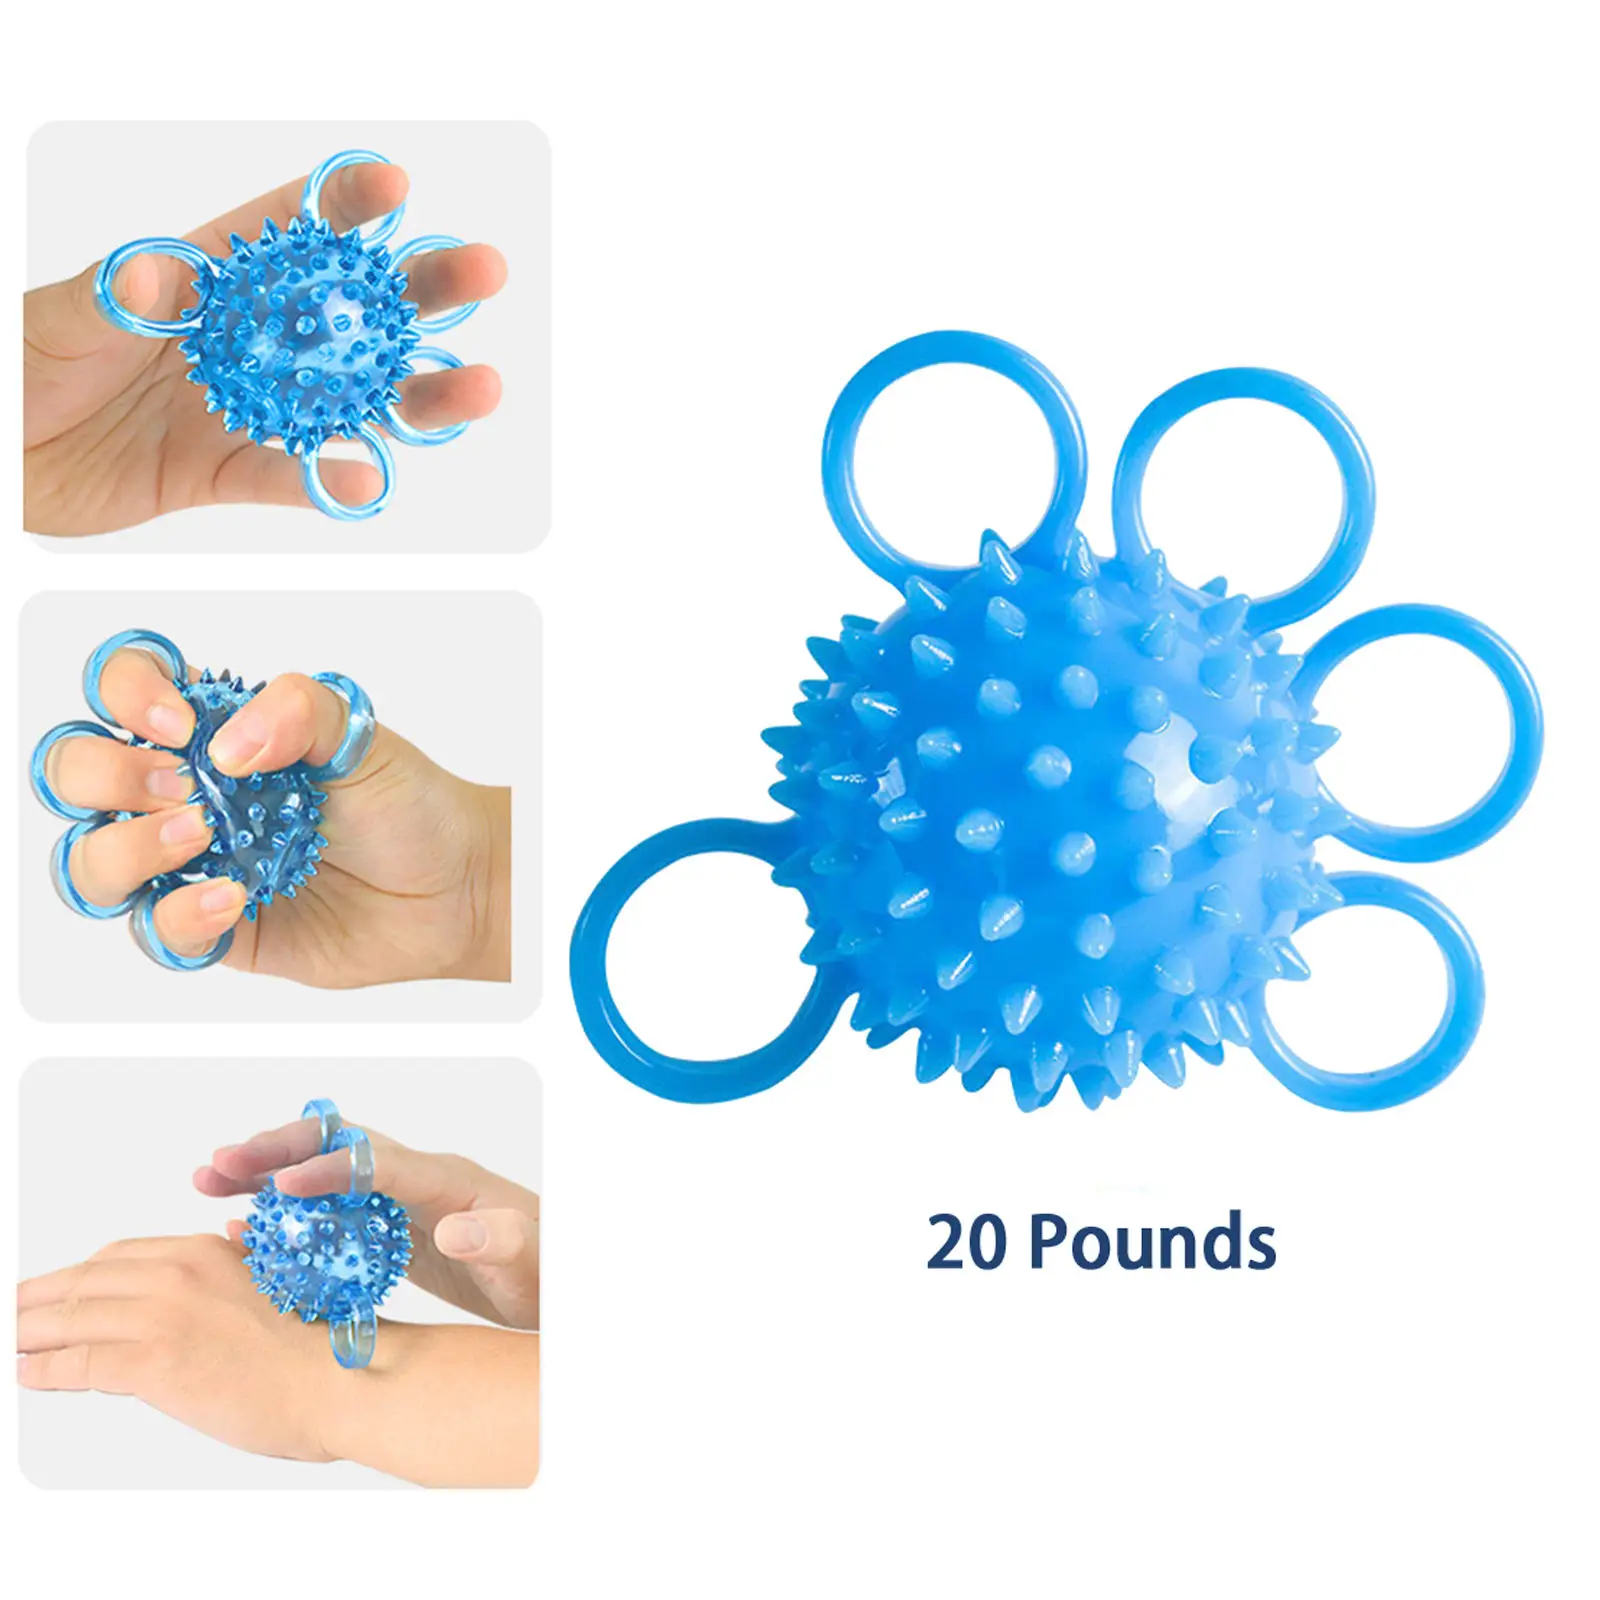 Hand Grip Ball Five Finger Force Training Strength Trainer Hedgehog for Elderly Adults